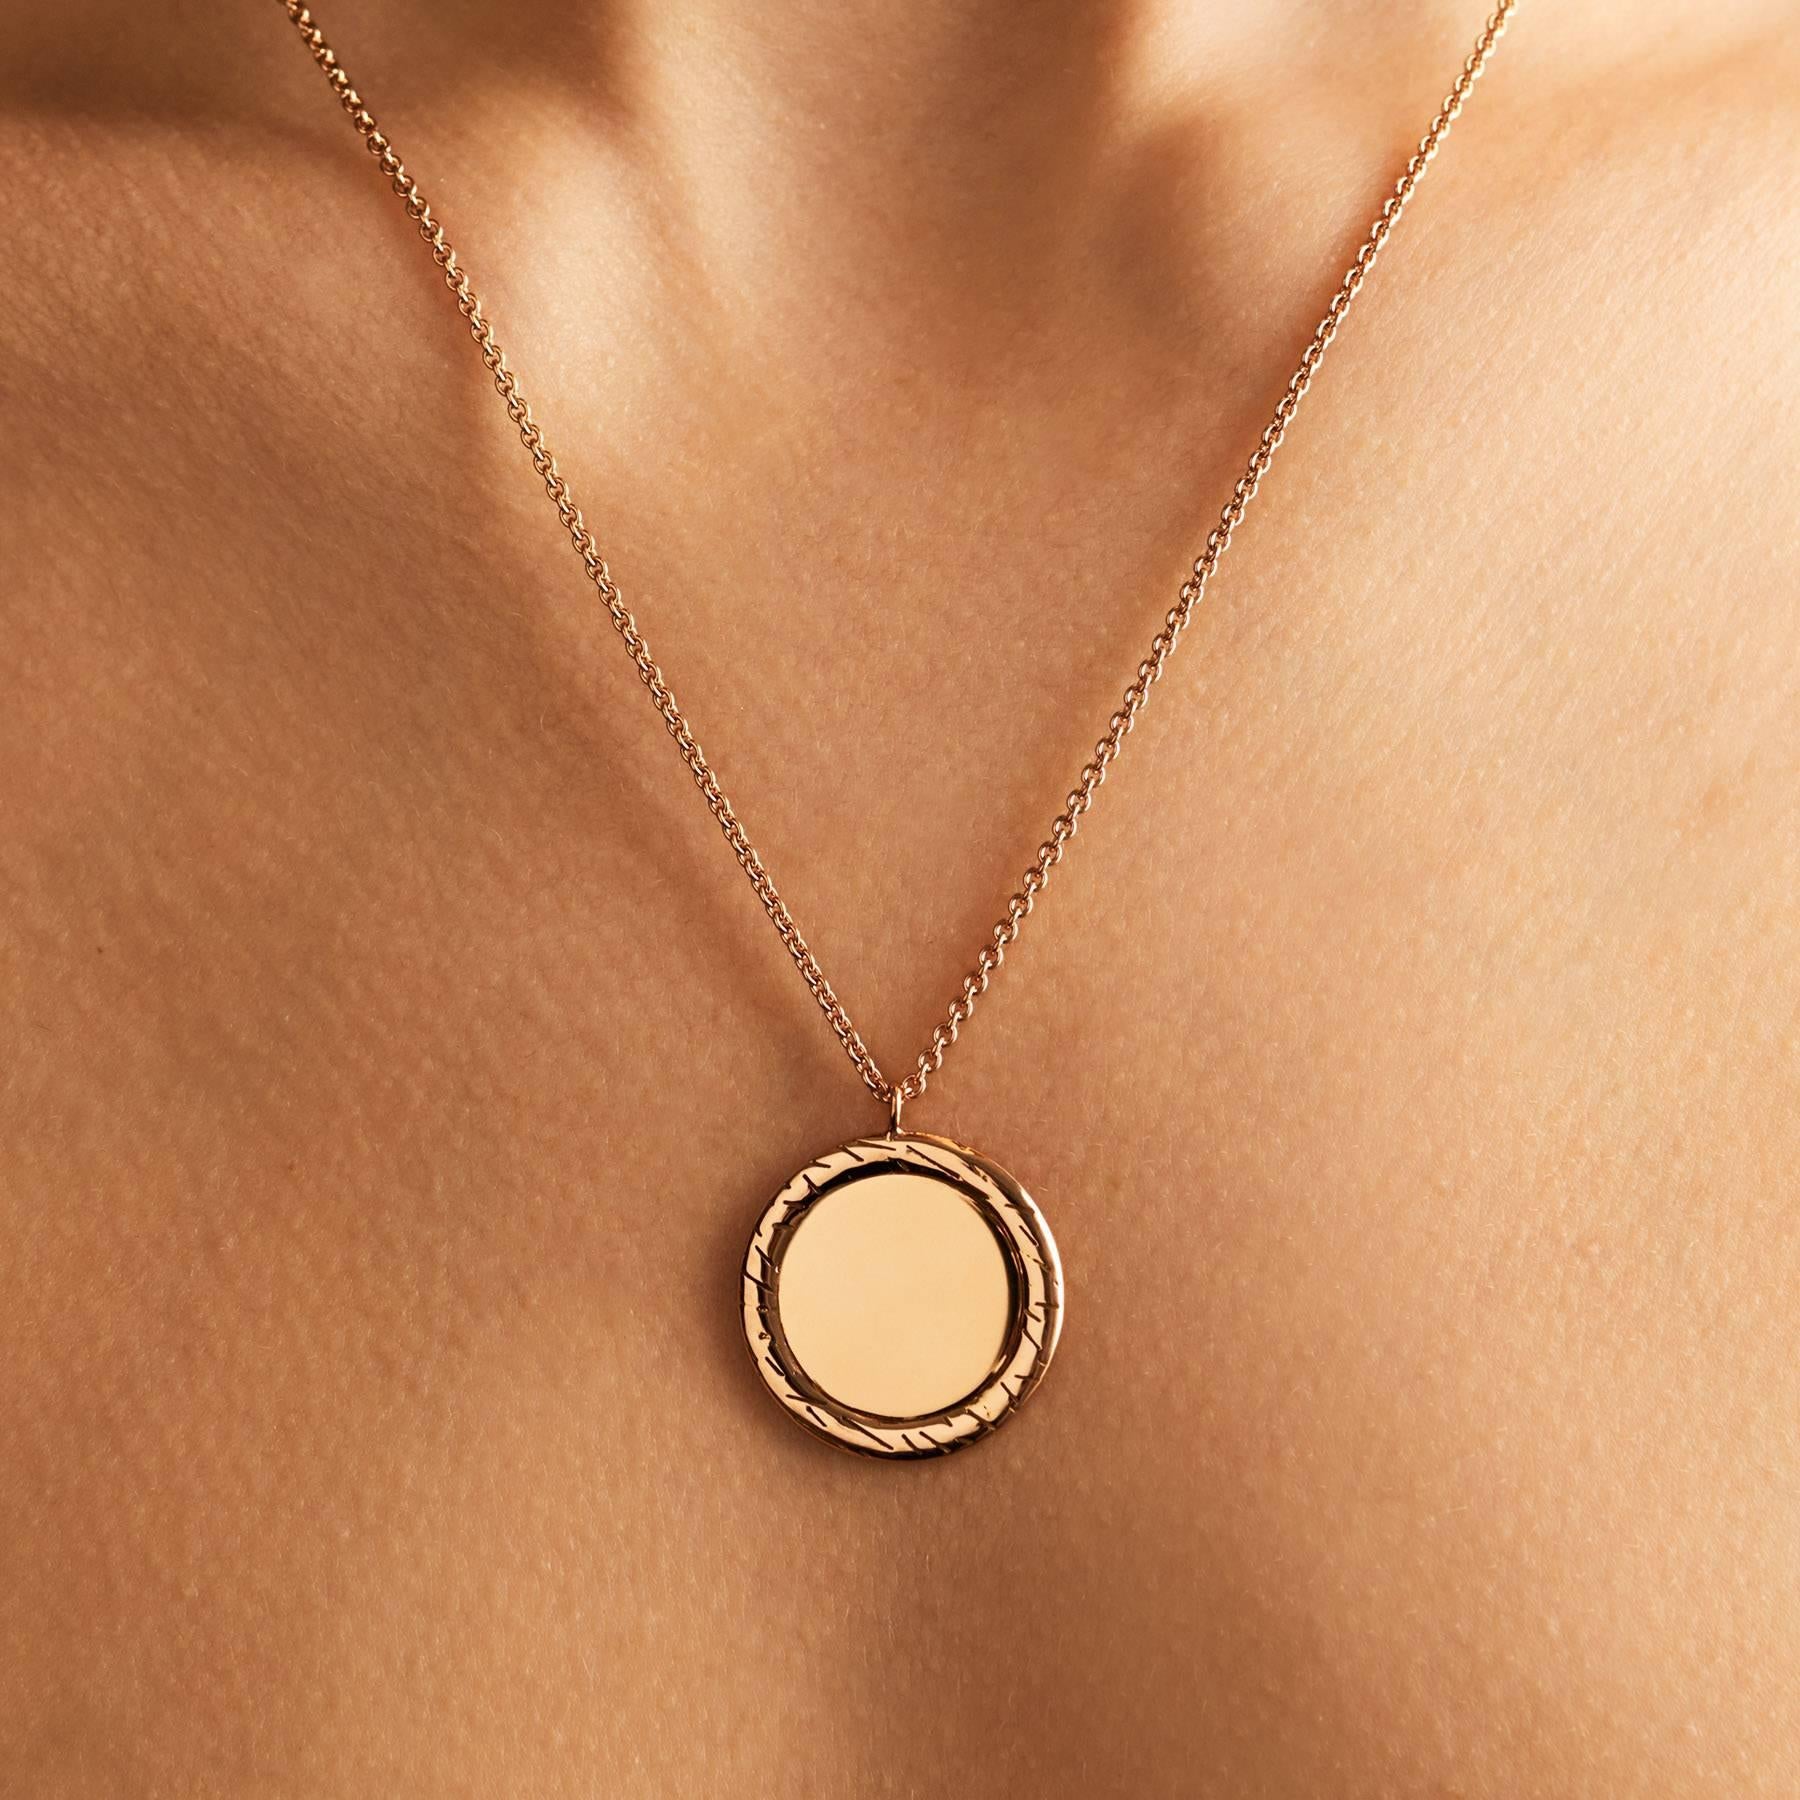 18ct rose gold necklace with fur texture engraving and plain disc pendant
Fully adjustable length chain; sizes 18” and 22”* available
Closed Circle diameter measuring 21mm
Made in London

Engraving available at additional cost. Please contact us via